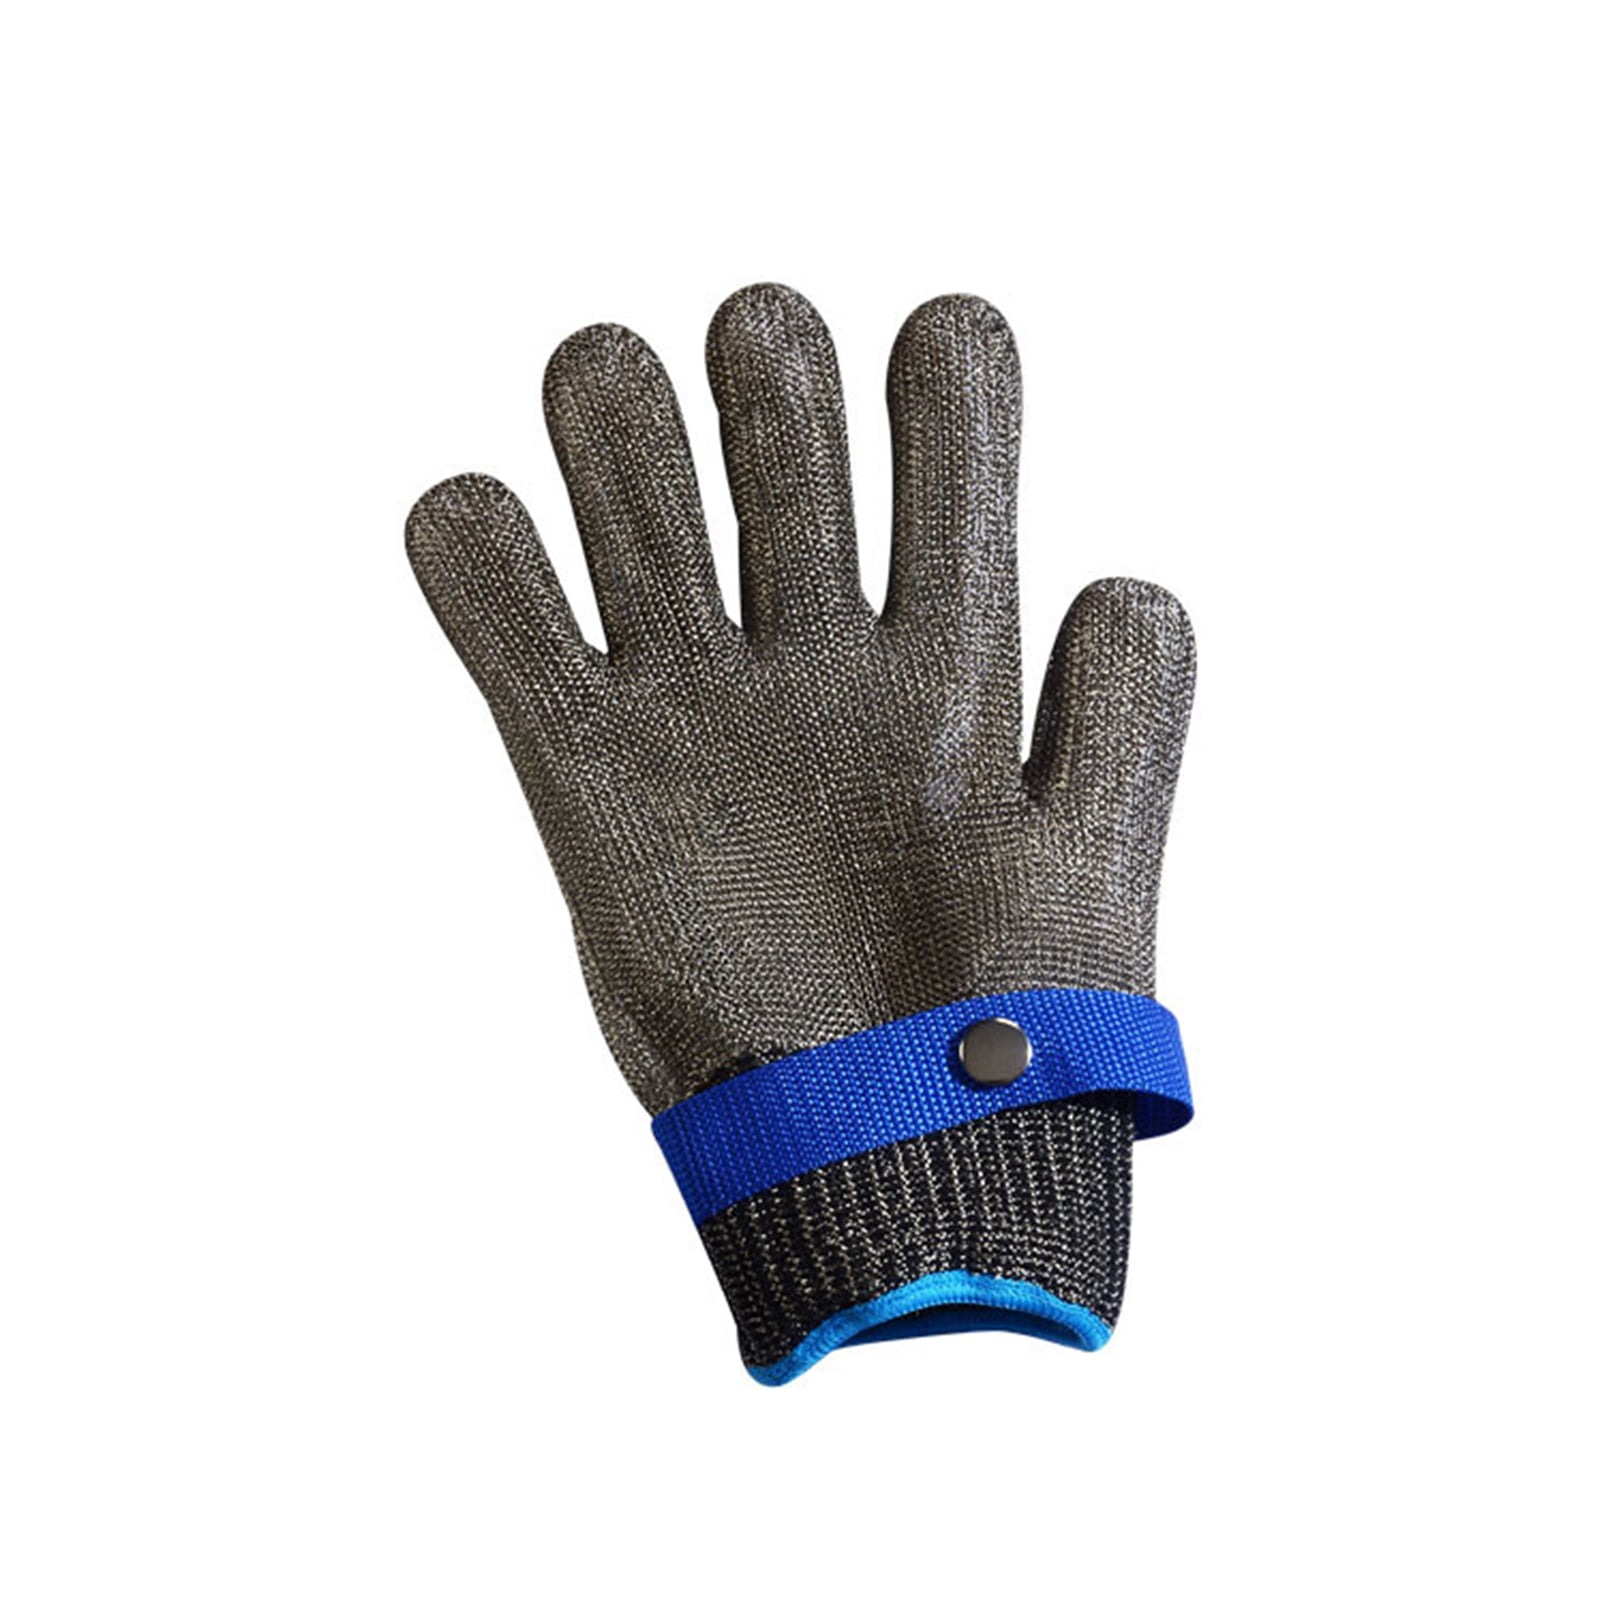 5 Grade Cut-Proof Safety Gloves Stab Resistant Flame Retardant Protection Gloves 